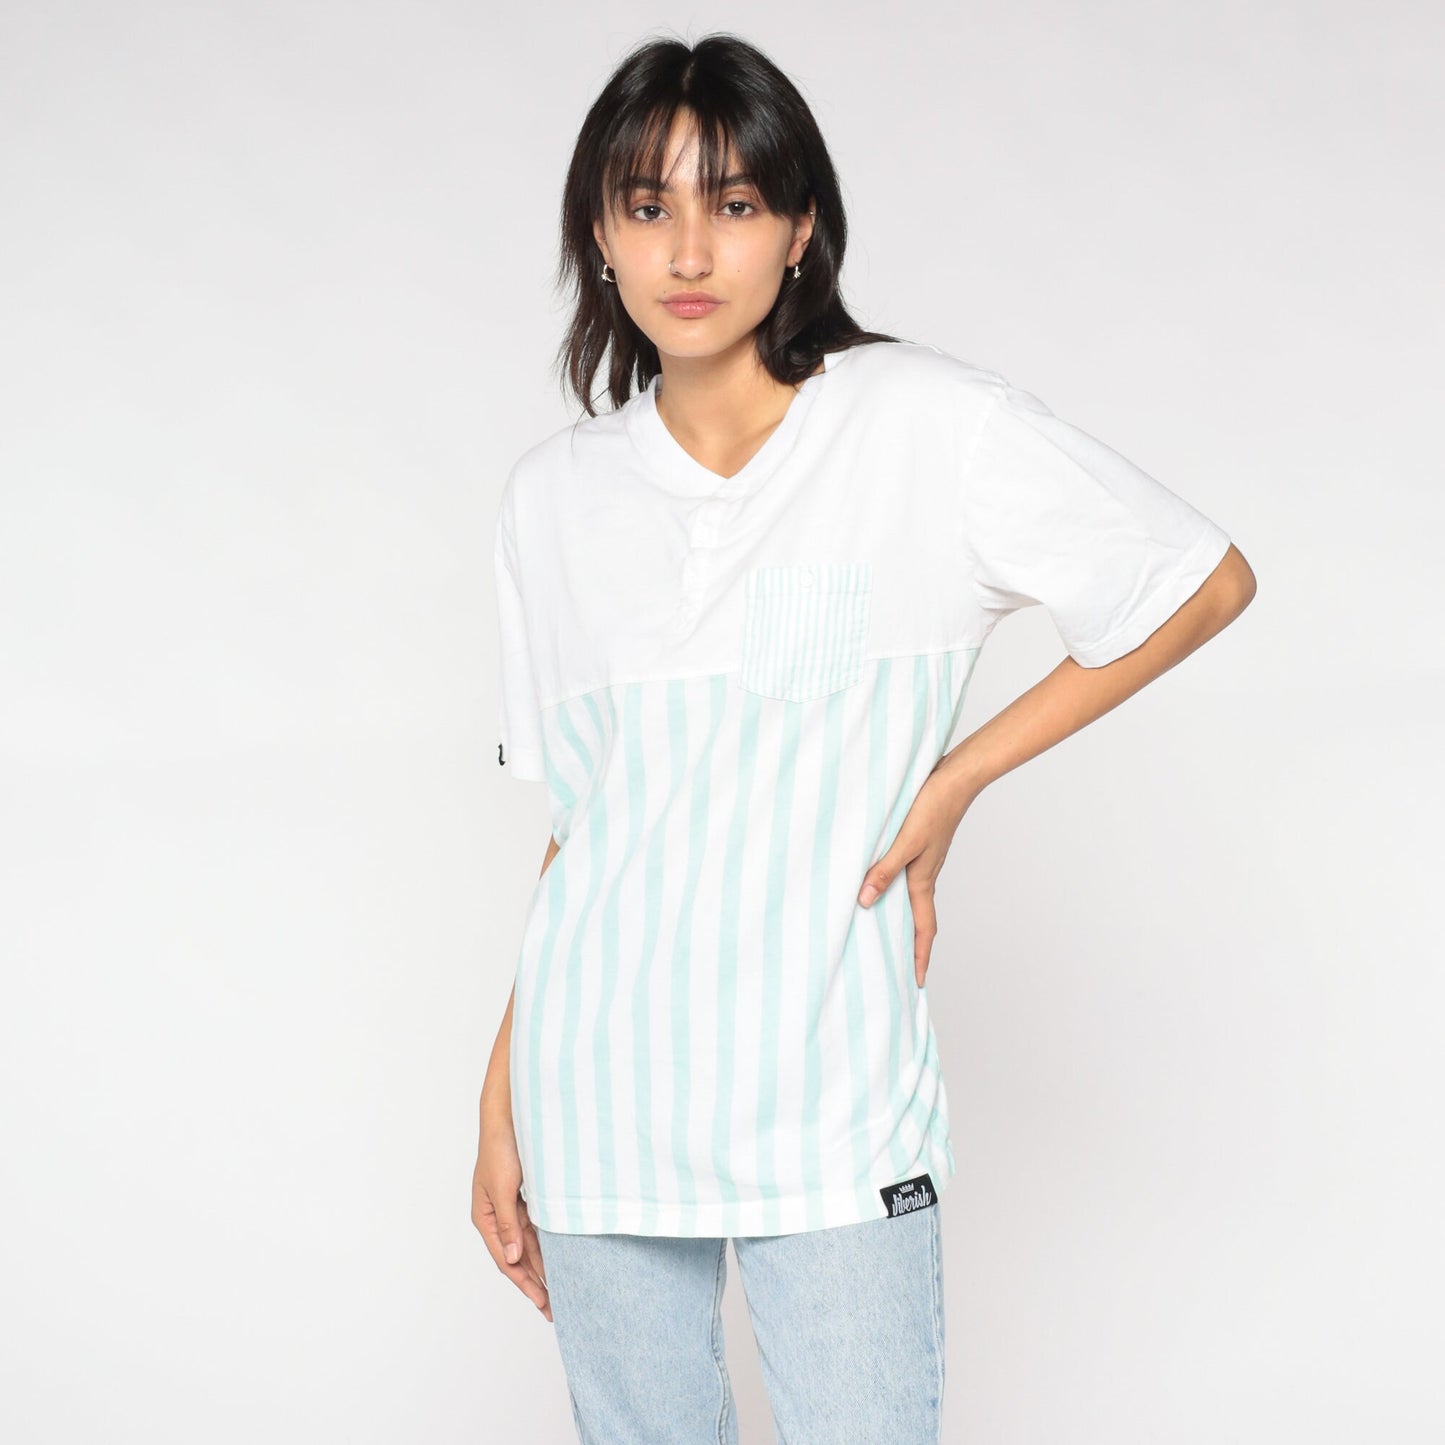 Striped Henley Shirt 90s Short Sleeve T-Shirt White Mint Green Stripes Button Up Pocket Tee Retro Basic Pastel Top Vintage 1990s Mens Large